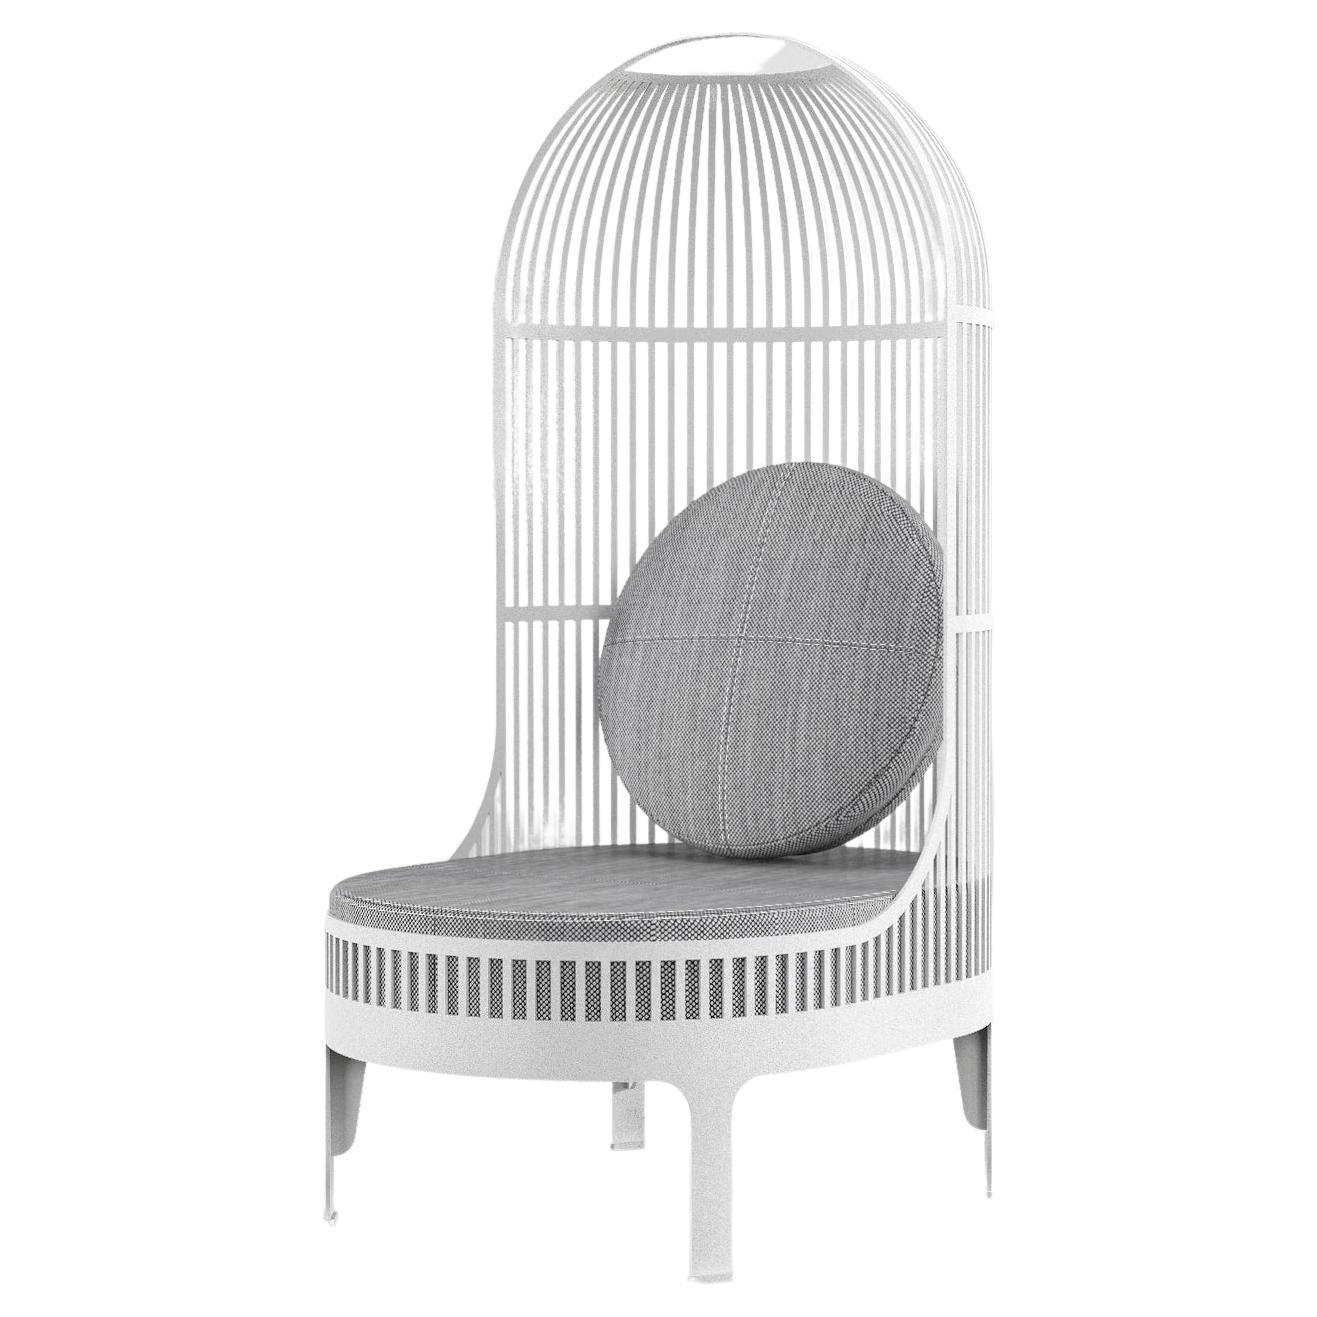 Nest Outdoor Chair For Sale